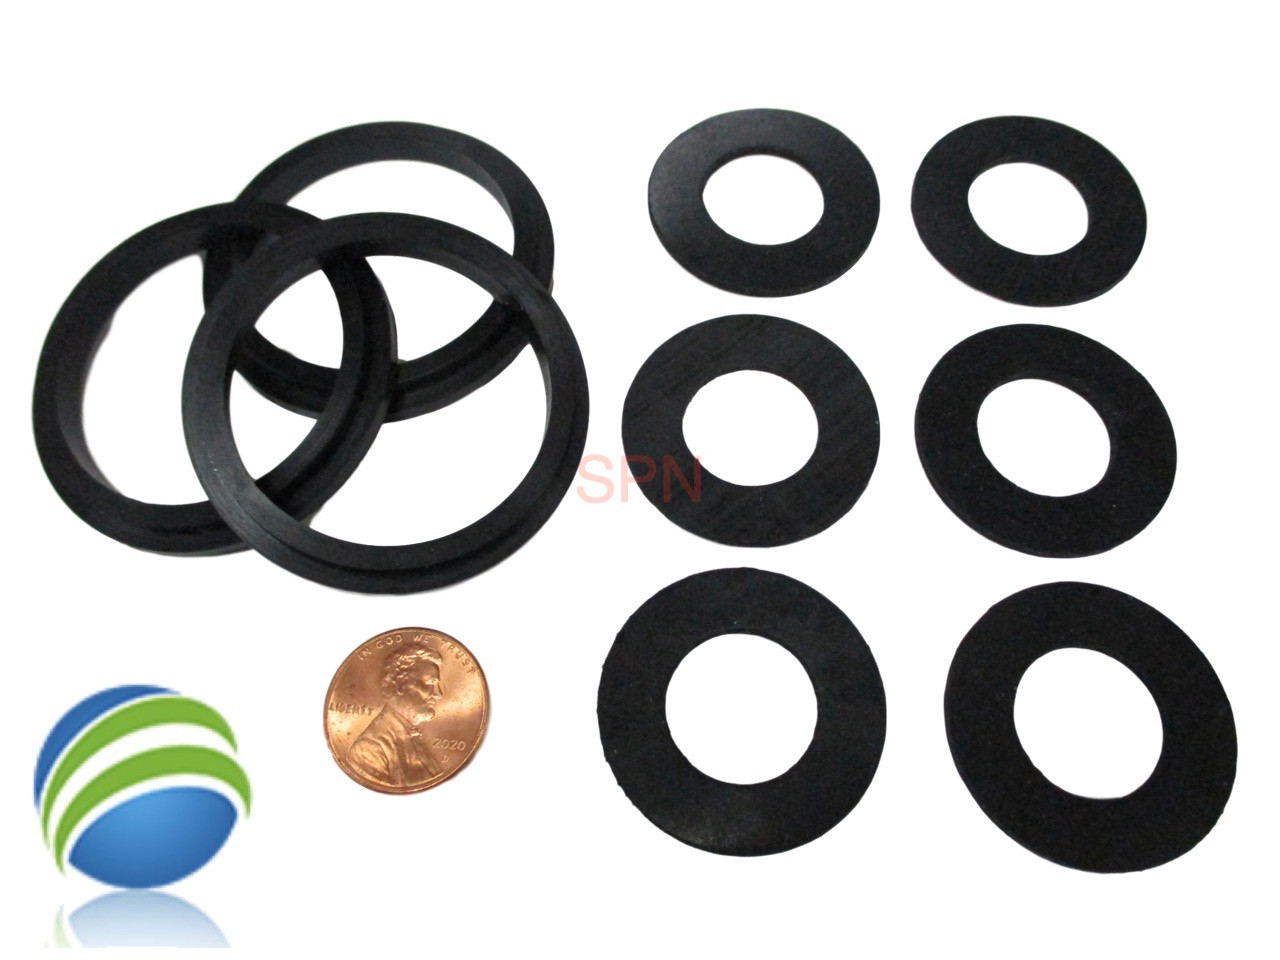 (3) Complete Set of (9) Gaskets (3) 2" Lip Gasket (6) 1" Thread Split Nut Gasket only for Air Union Saluspa Lay-Z-Spa™ Airjet™ "A" & "B/C" Couplings